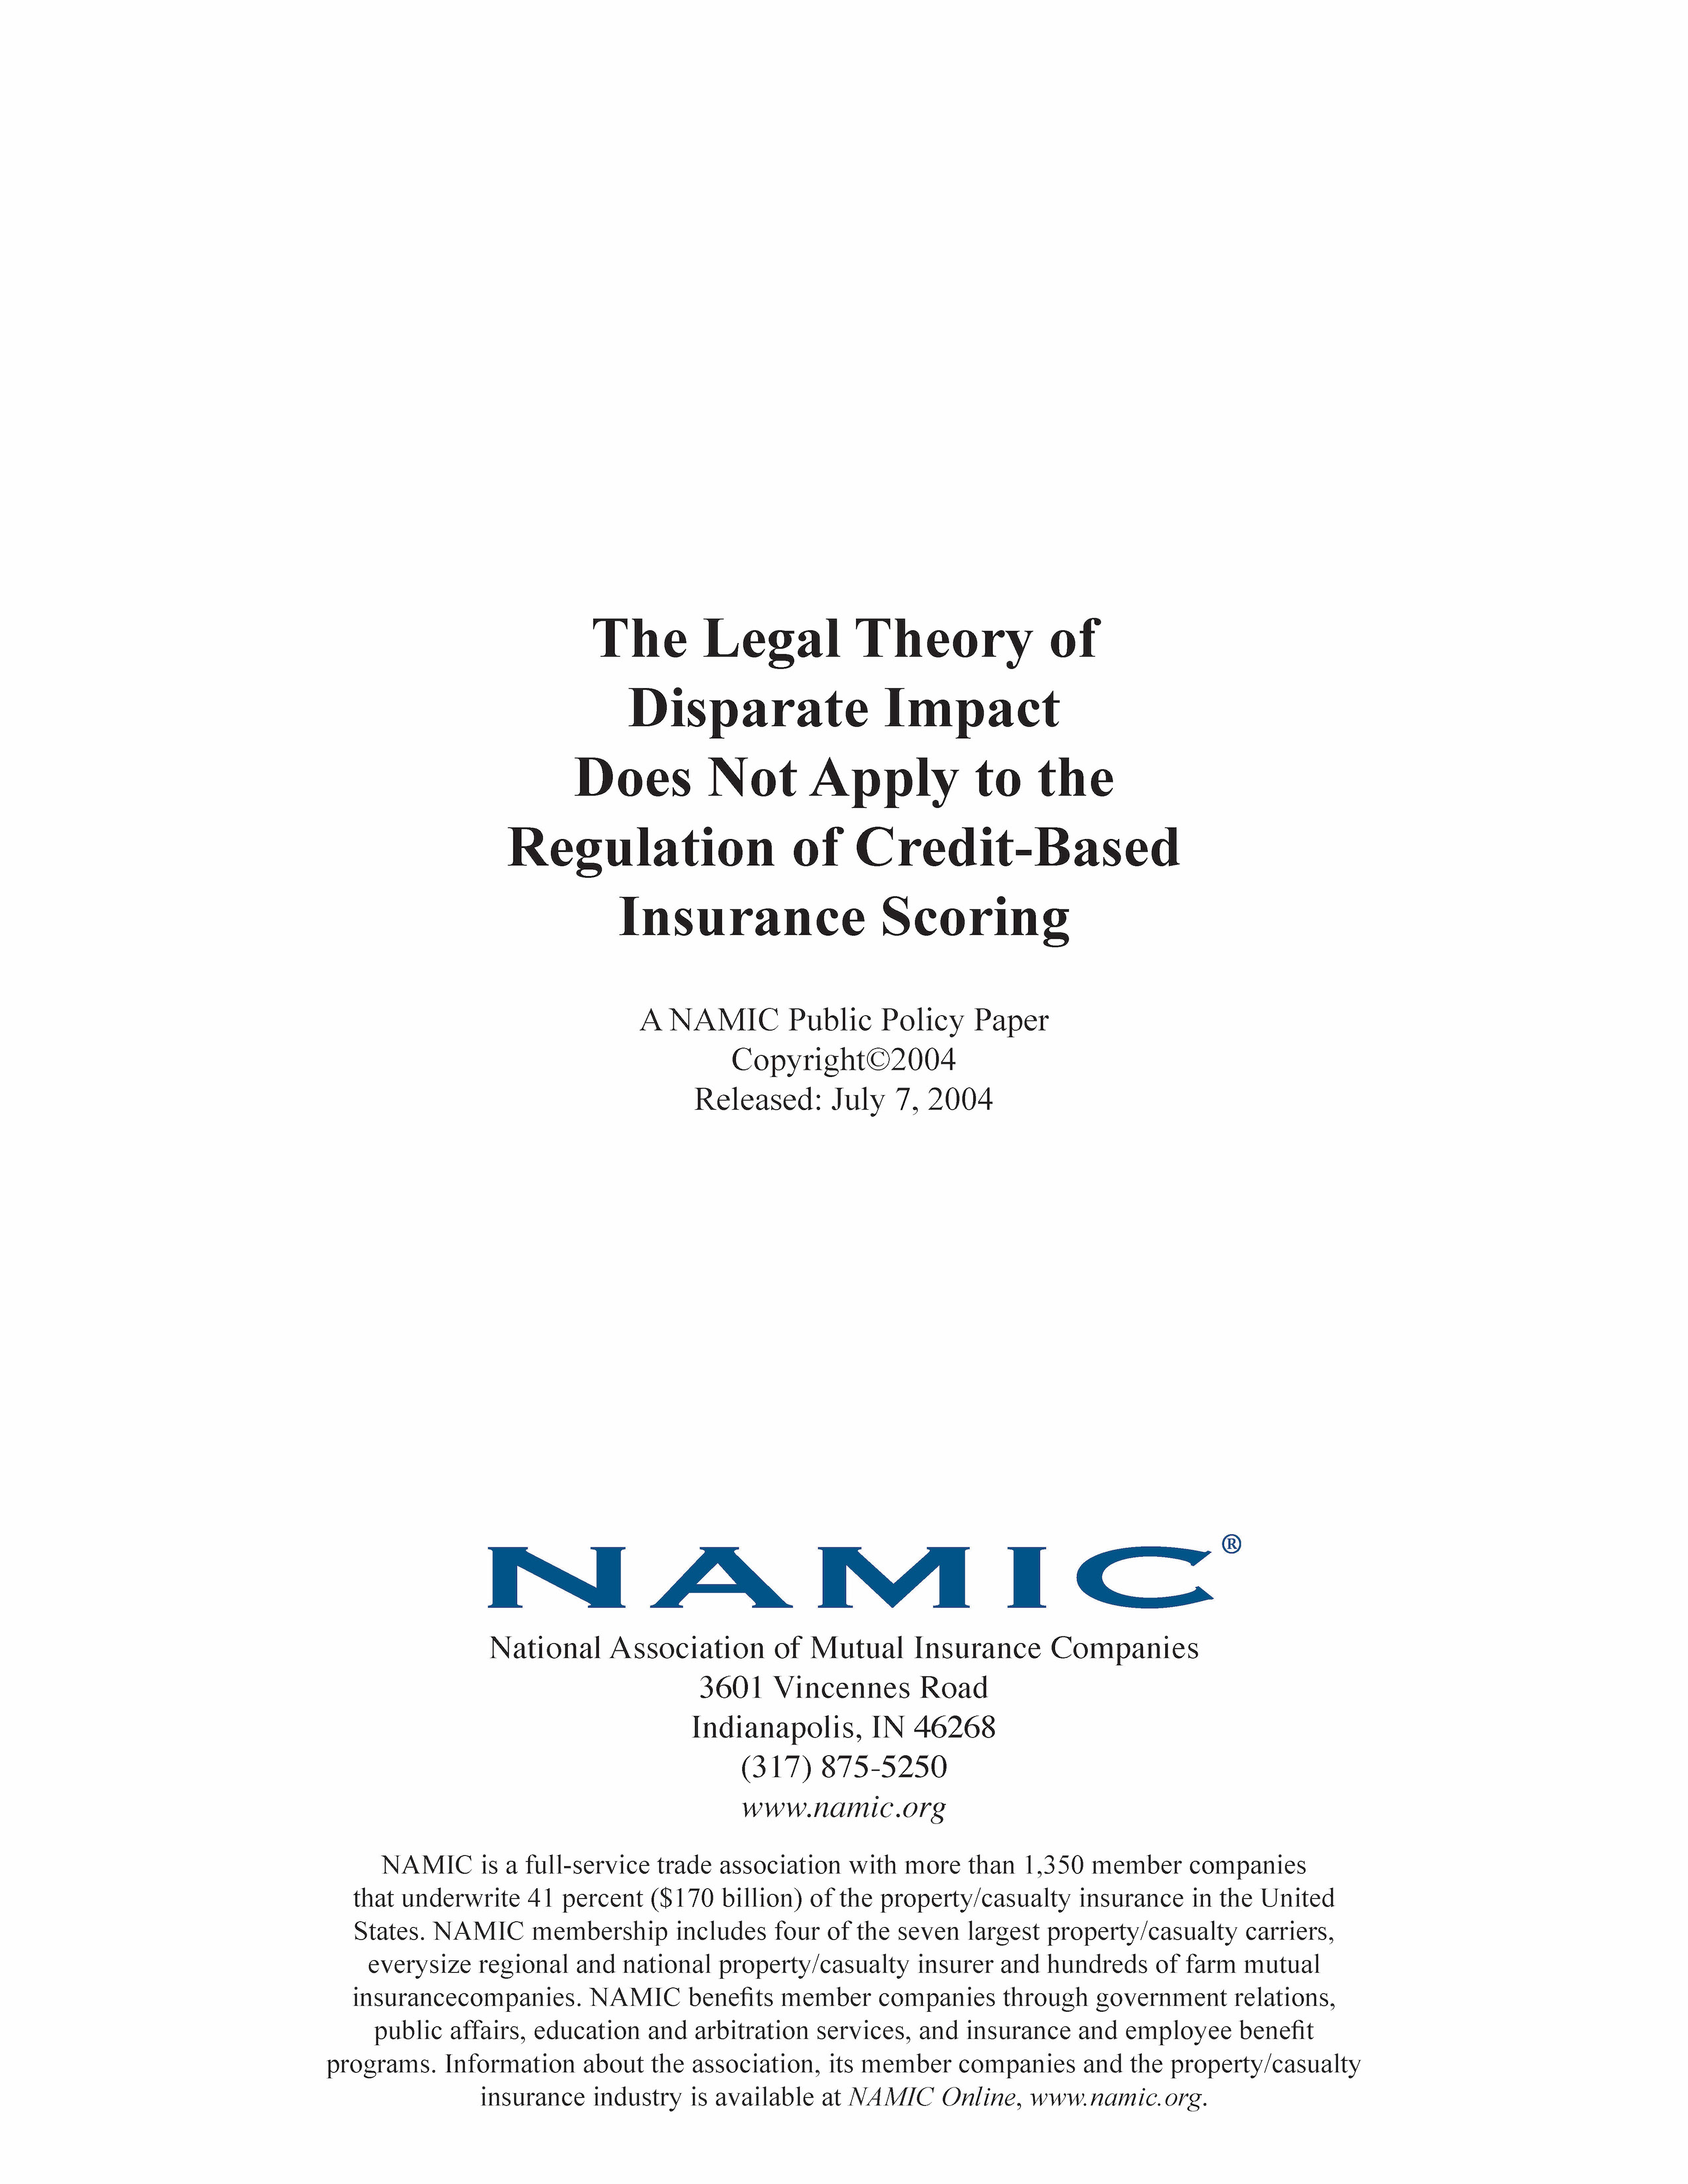 The Legal Theory of Disparate Impact Does Not Apply to the Regulation of Credit-Based Insurance Scoring PDF